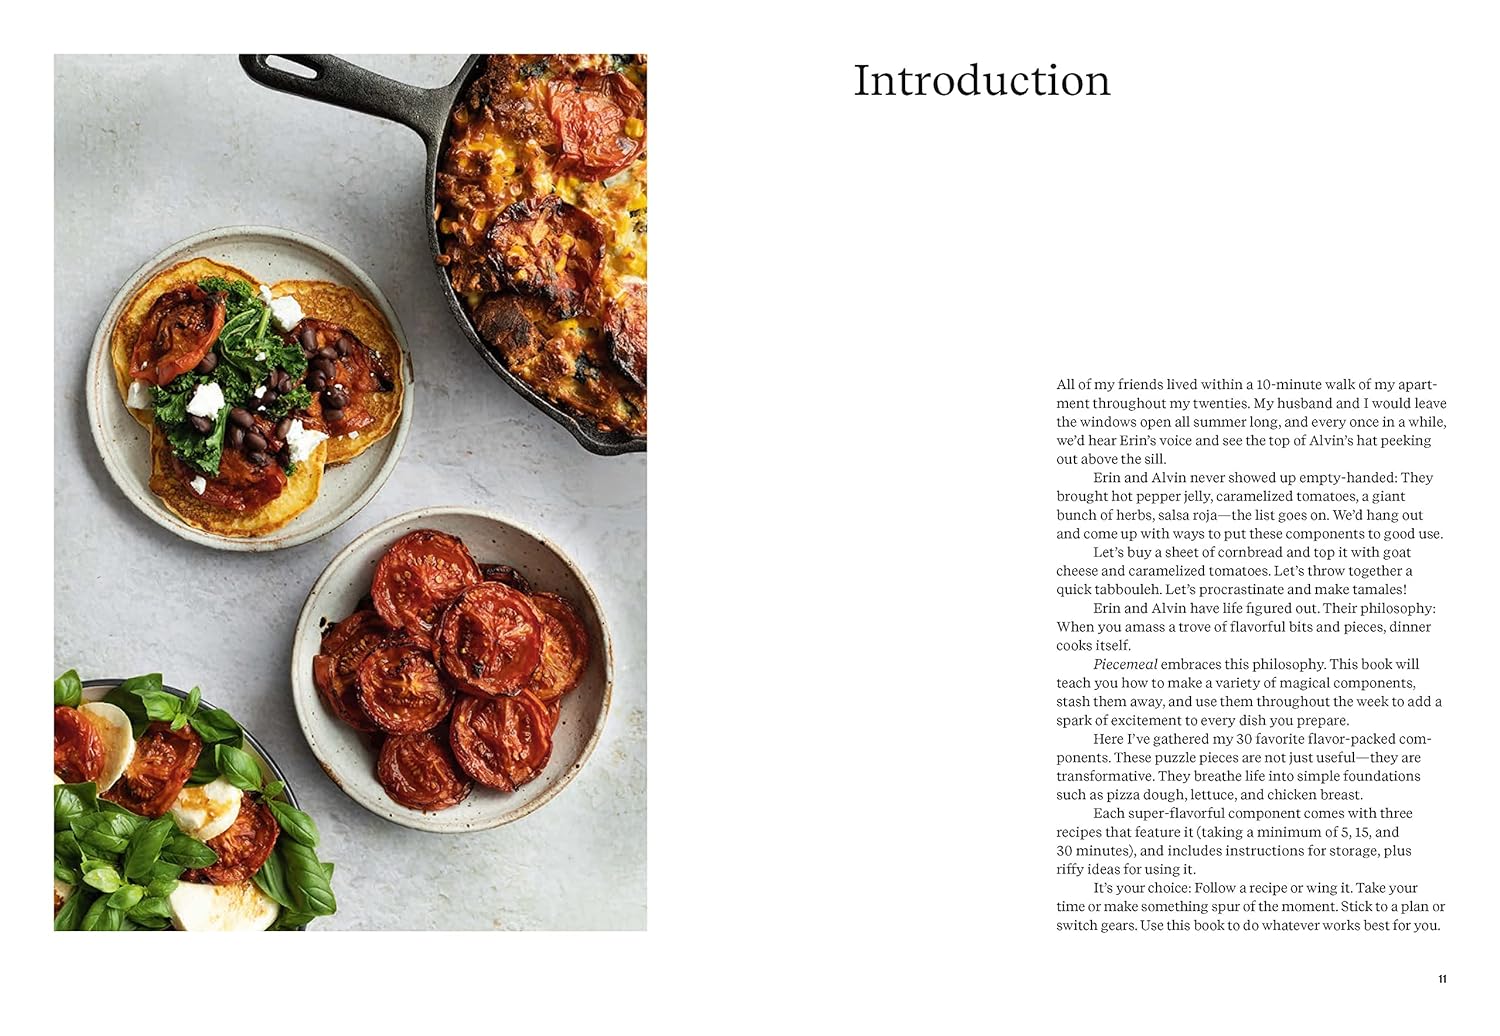 Piecemeal: A Meal-Planning Repertoire with 120 Recipes to Make in 5+, 15+, or 30+ Minutes